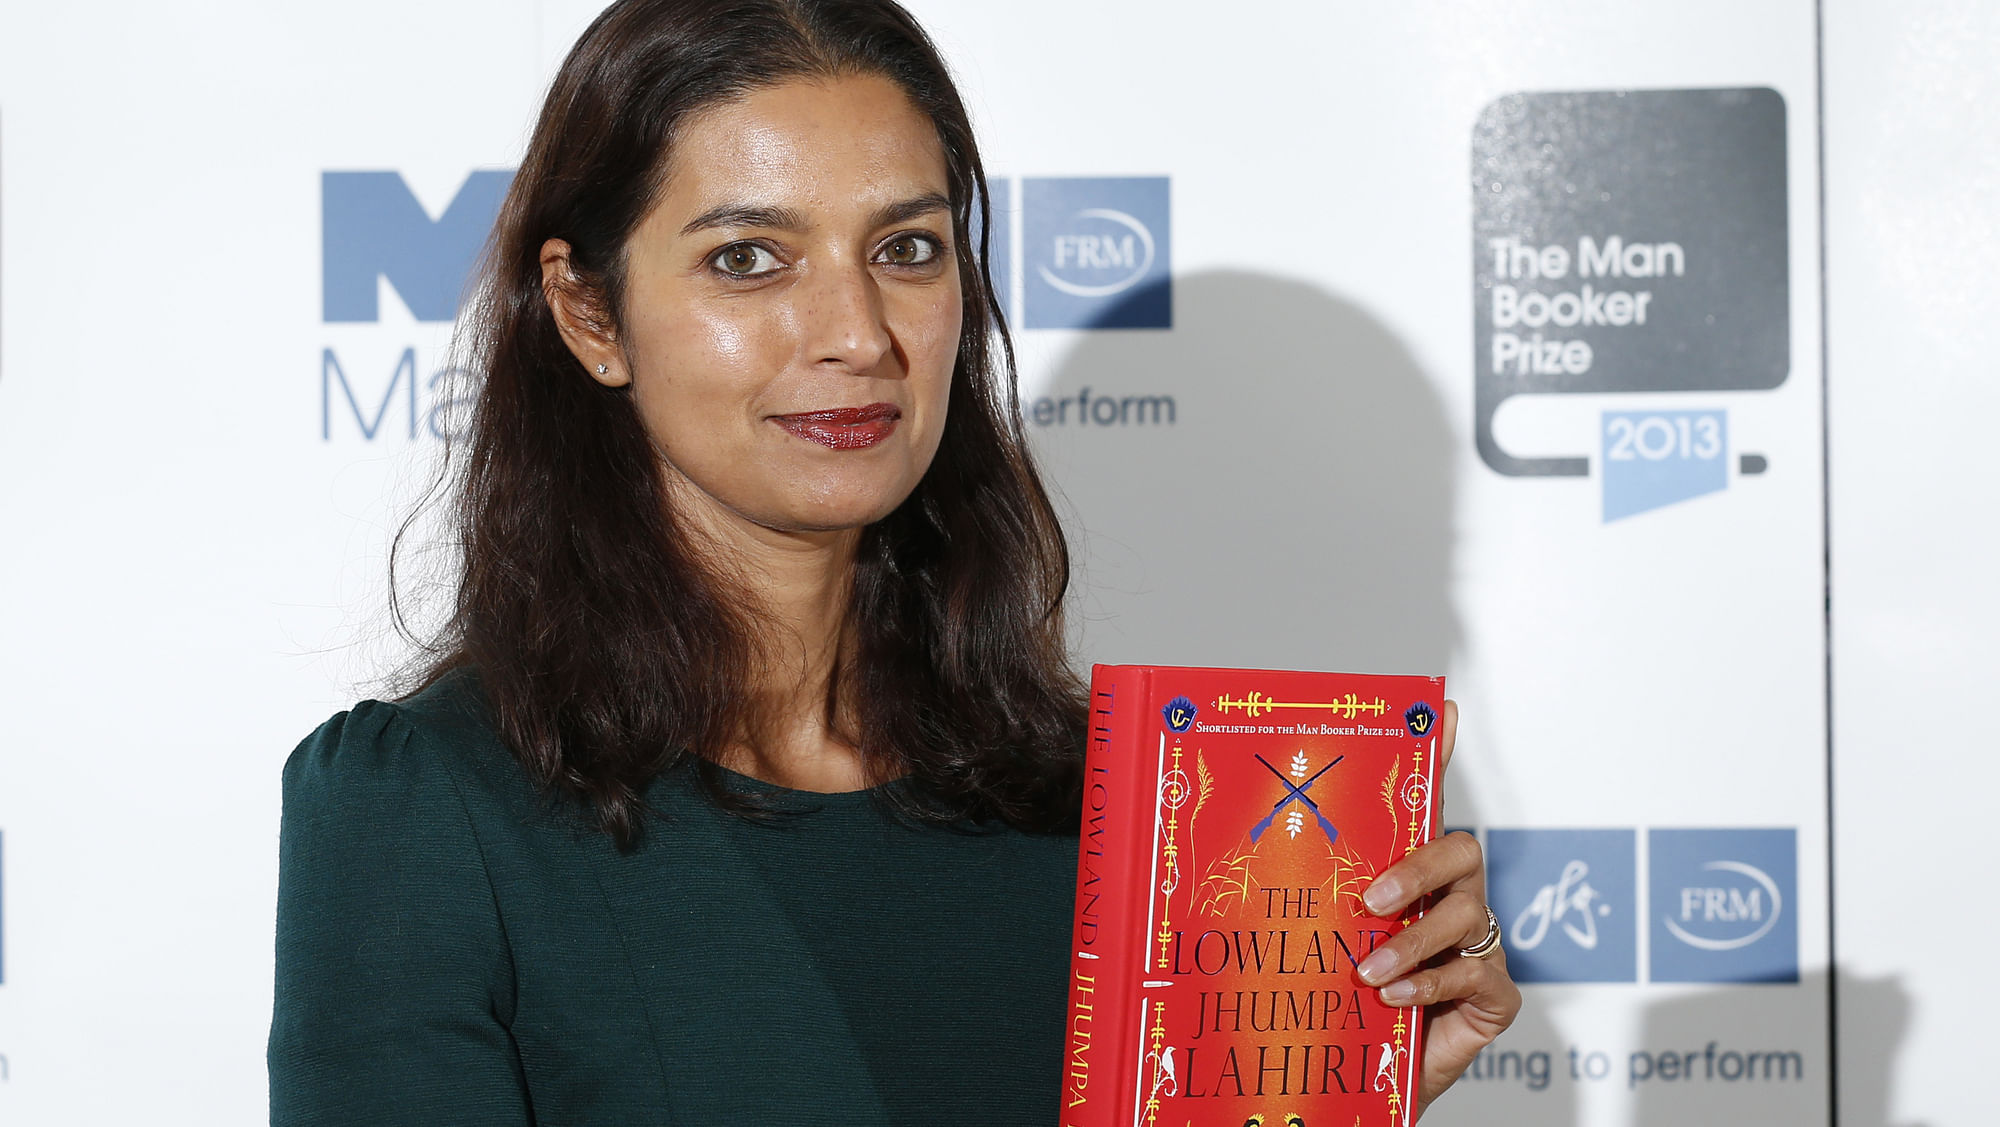 Jhumpa Lahiri poses with her book “The Lowland” at the Southbank Centre in London, October 13, 2013. (Photo: Reuters)